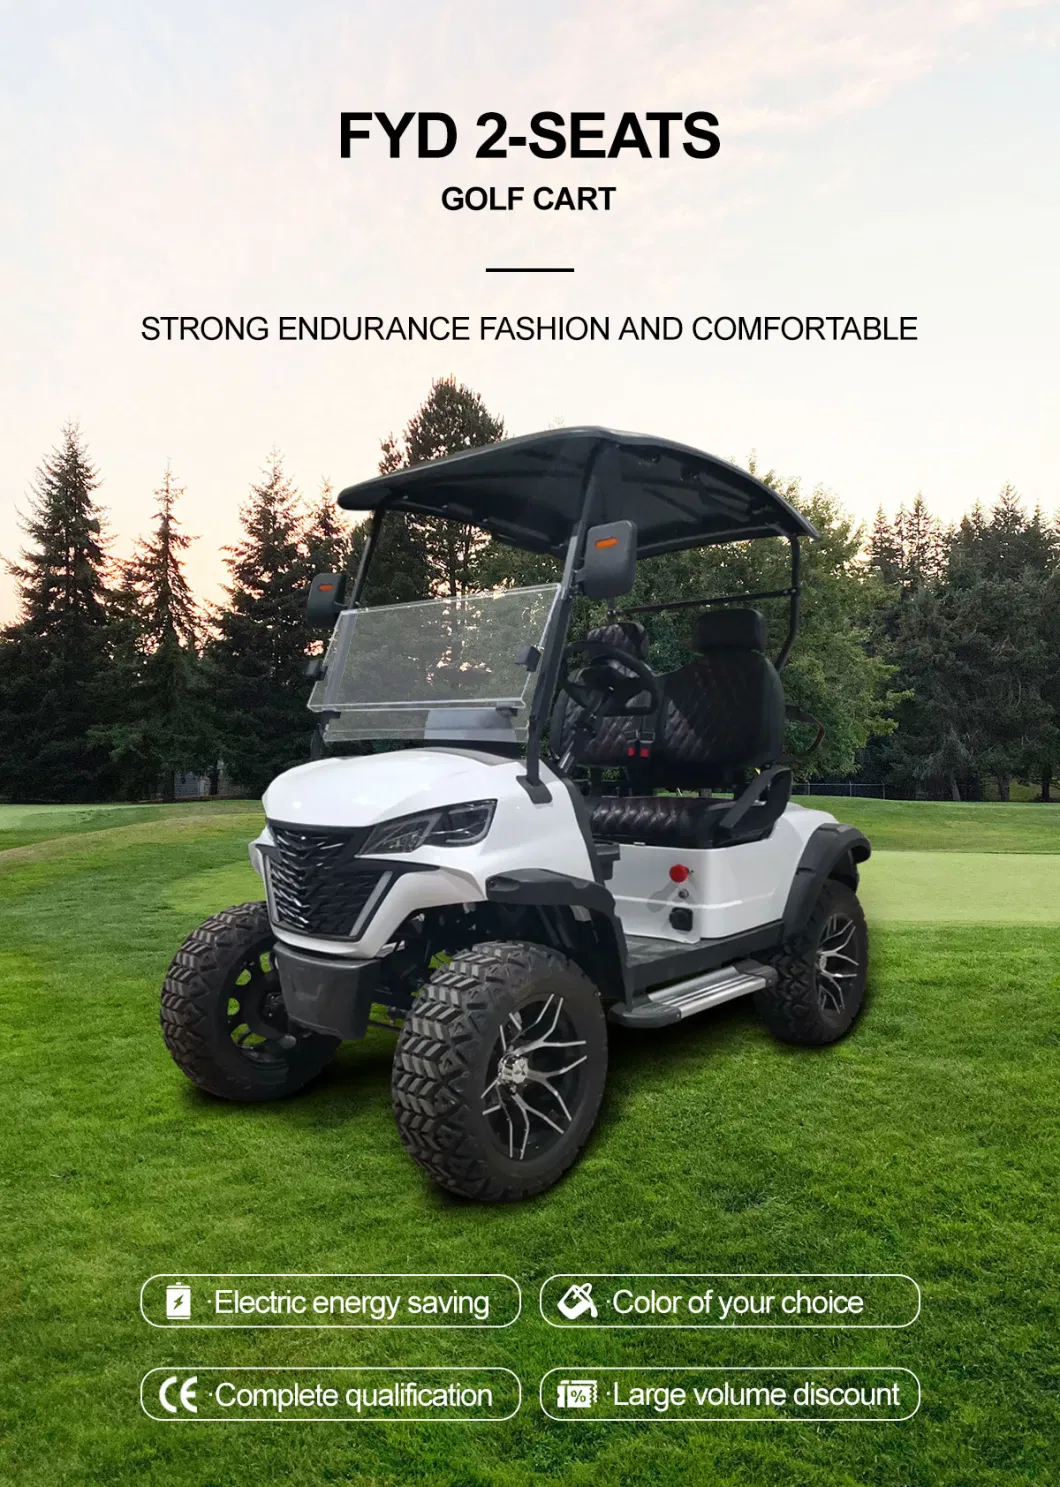 Mini Single 1 Long Seat 2 Seaters Buggy 4 Wheel Electric Mobility Scooter Club Car Sport Motorized Modified Golf Cart for Sale